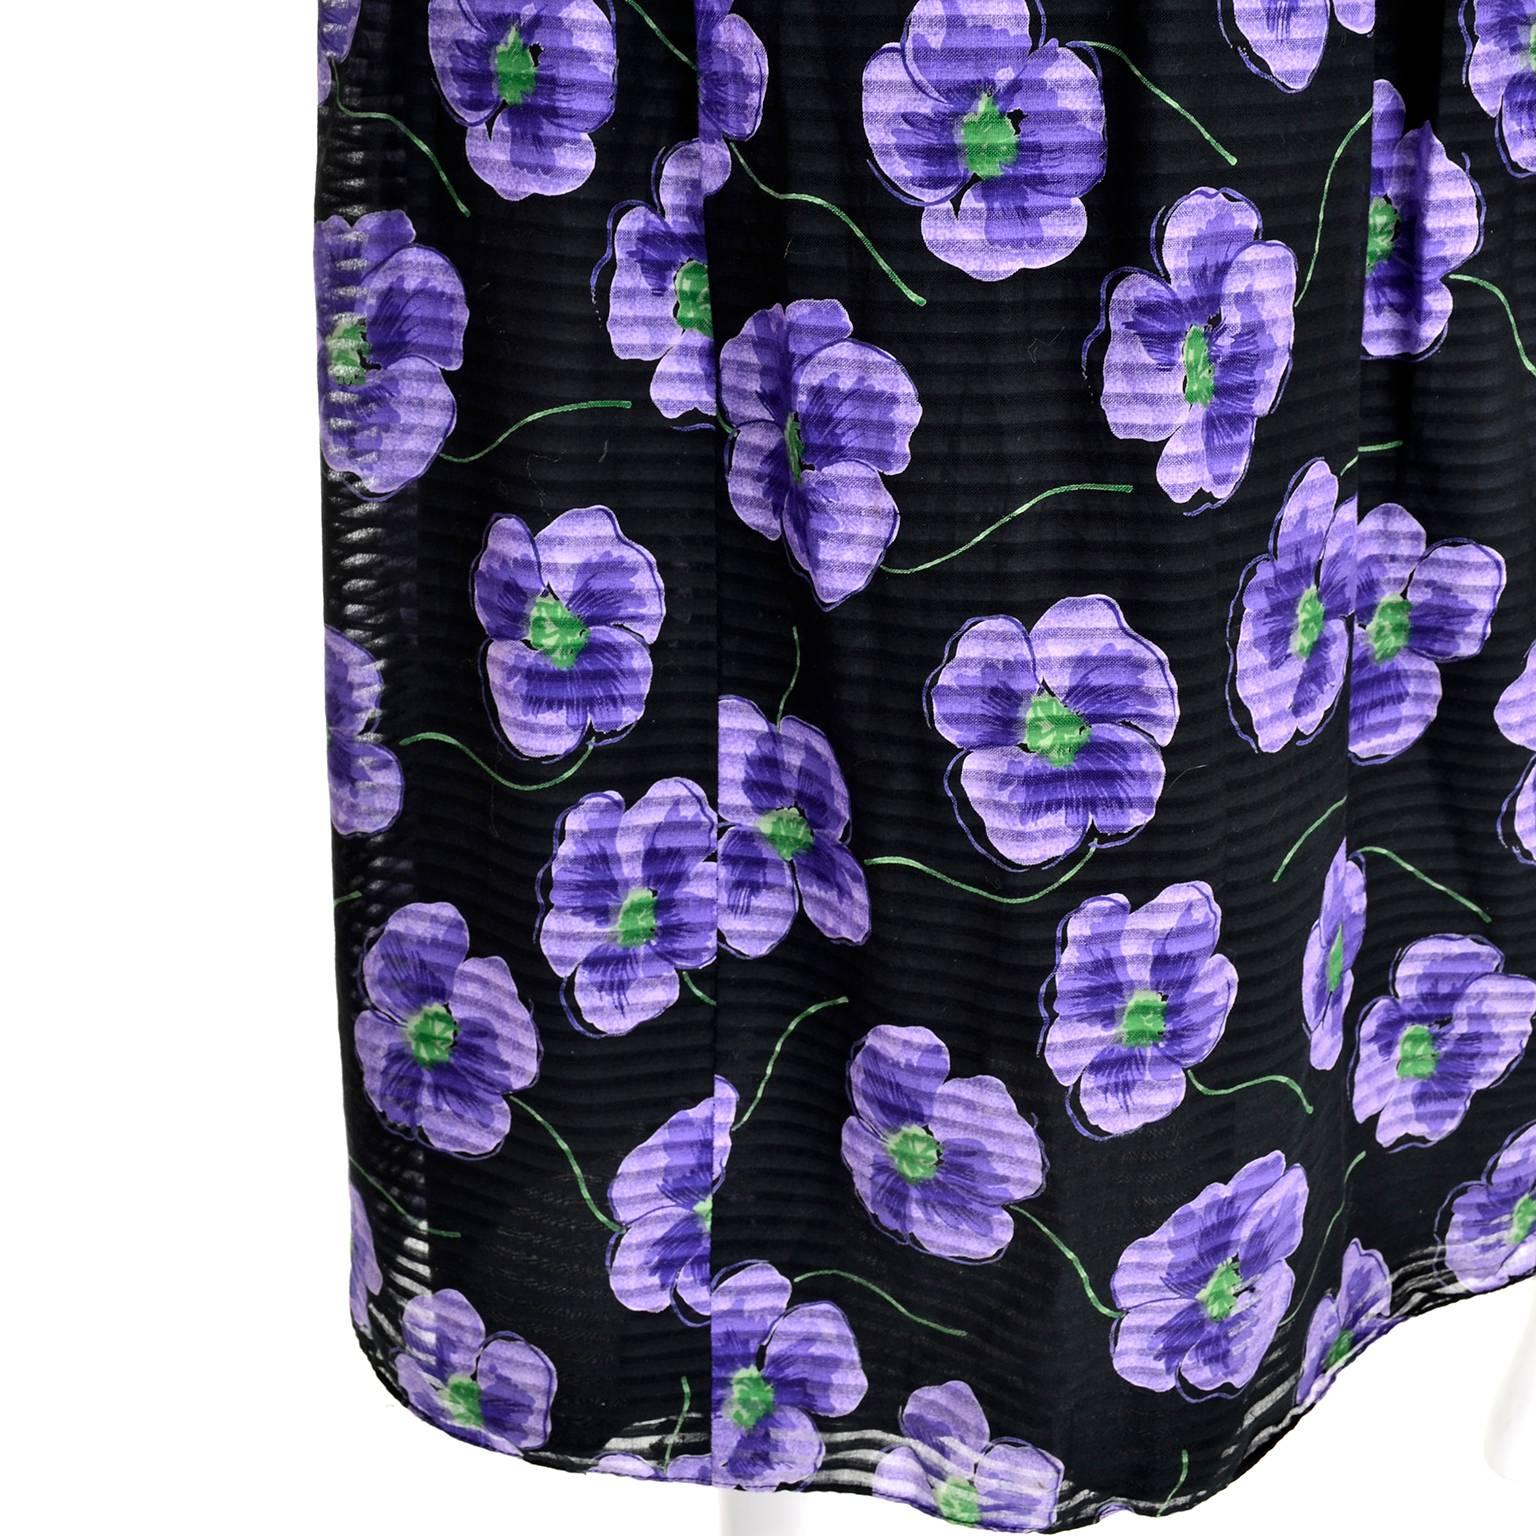 This is a pretty black Anthony Muto vintage dress adorned with beautiful purple flowers. The summer cotton or cotton blend voile dress has a sheer, subtly striped outer layer, and is lined in black fabric. It is sleeveless with a scoop neck and